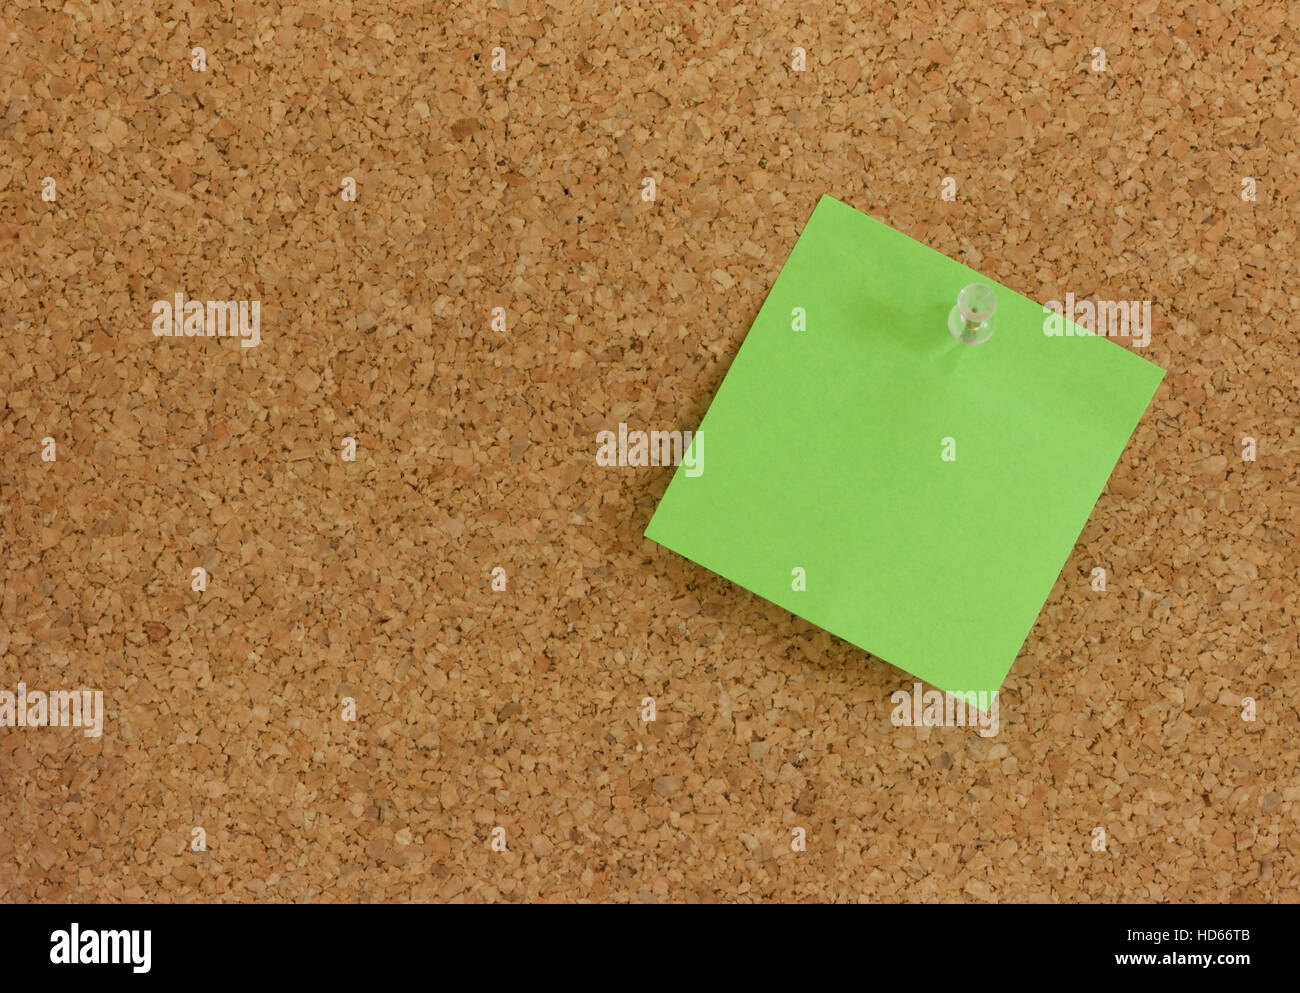 Green post-it note memo pinned to a pin board Stock Photo